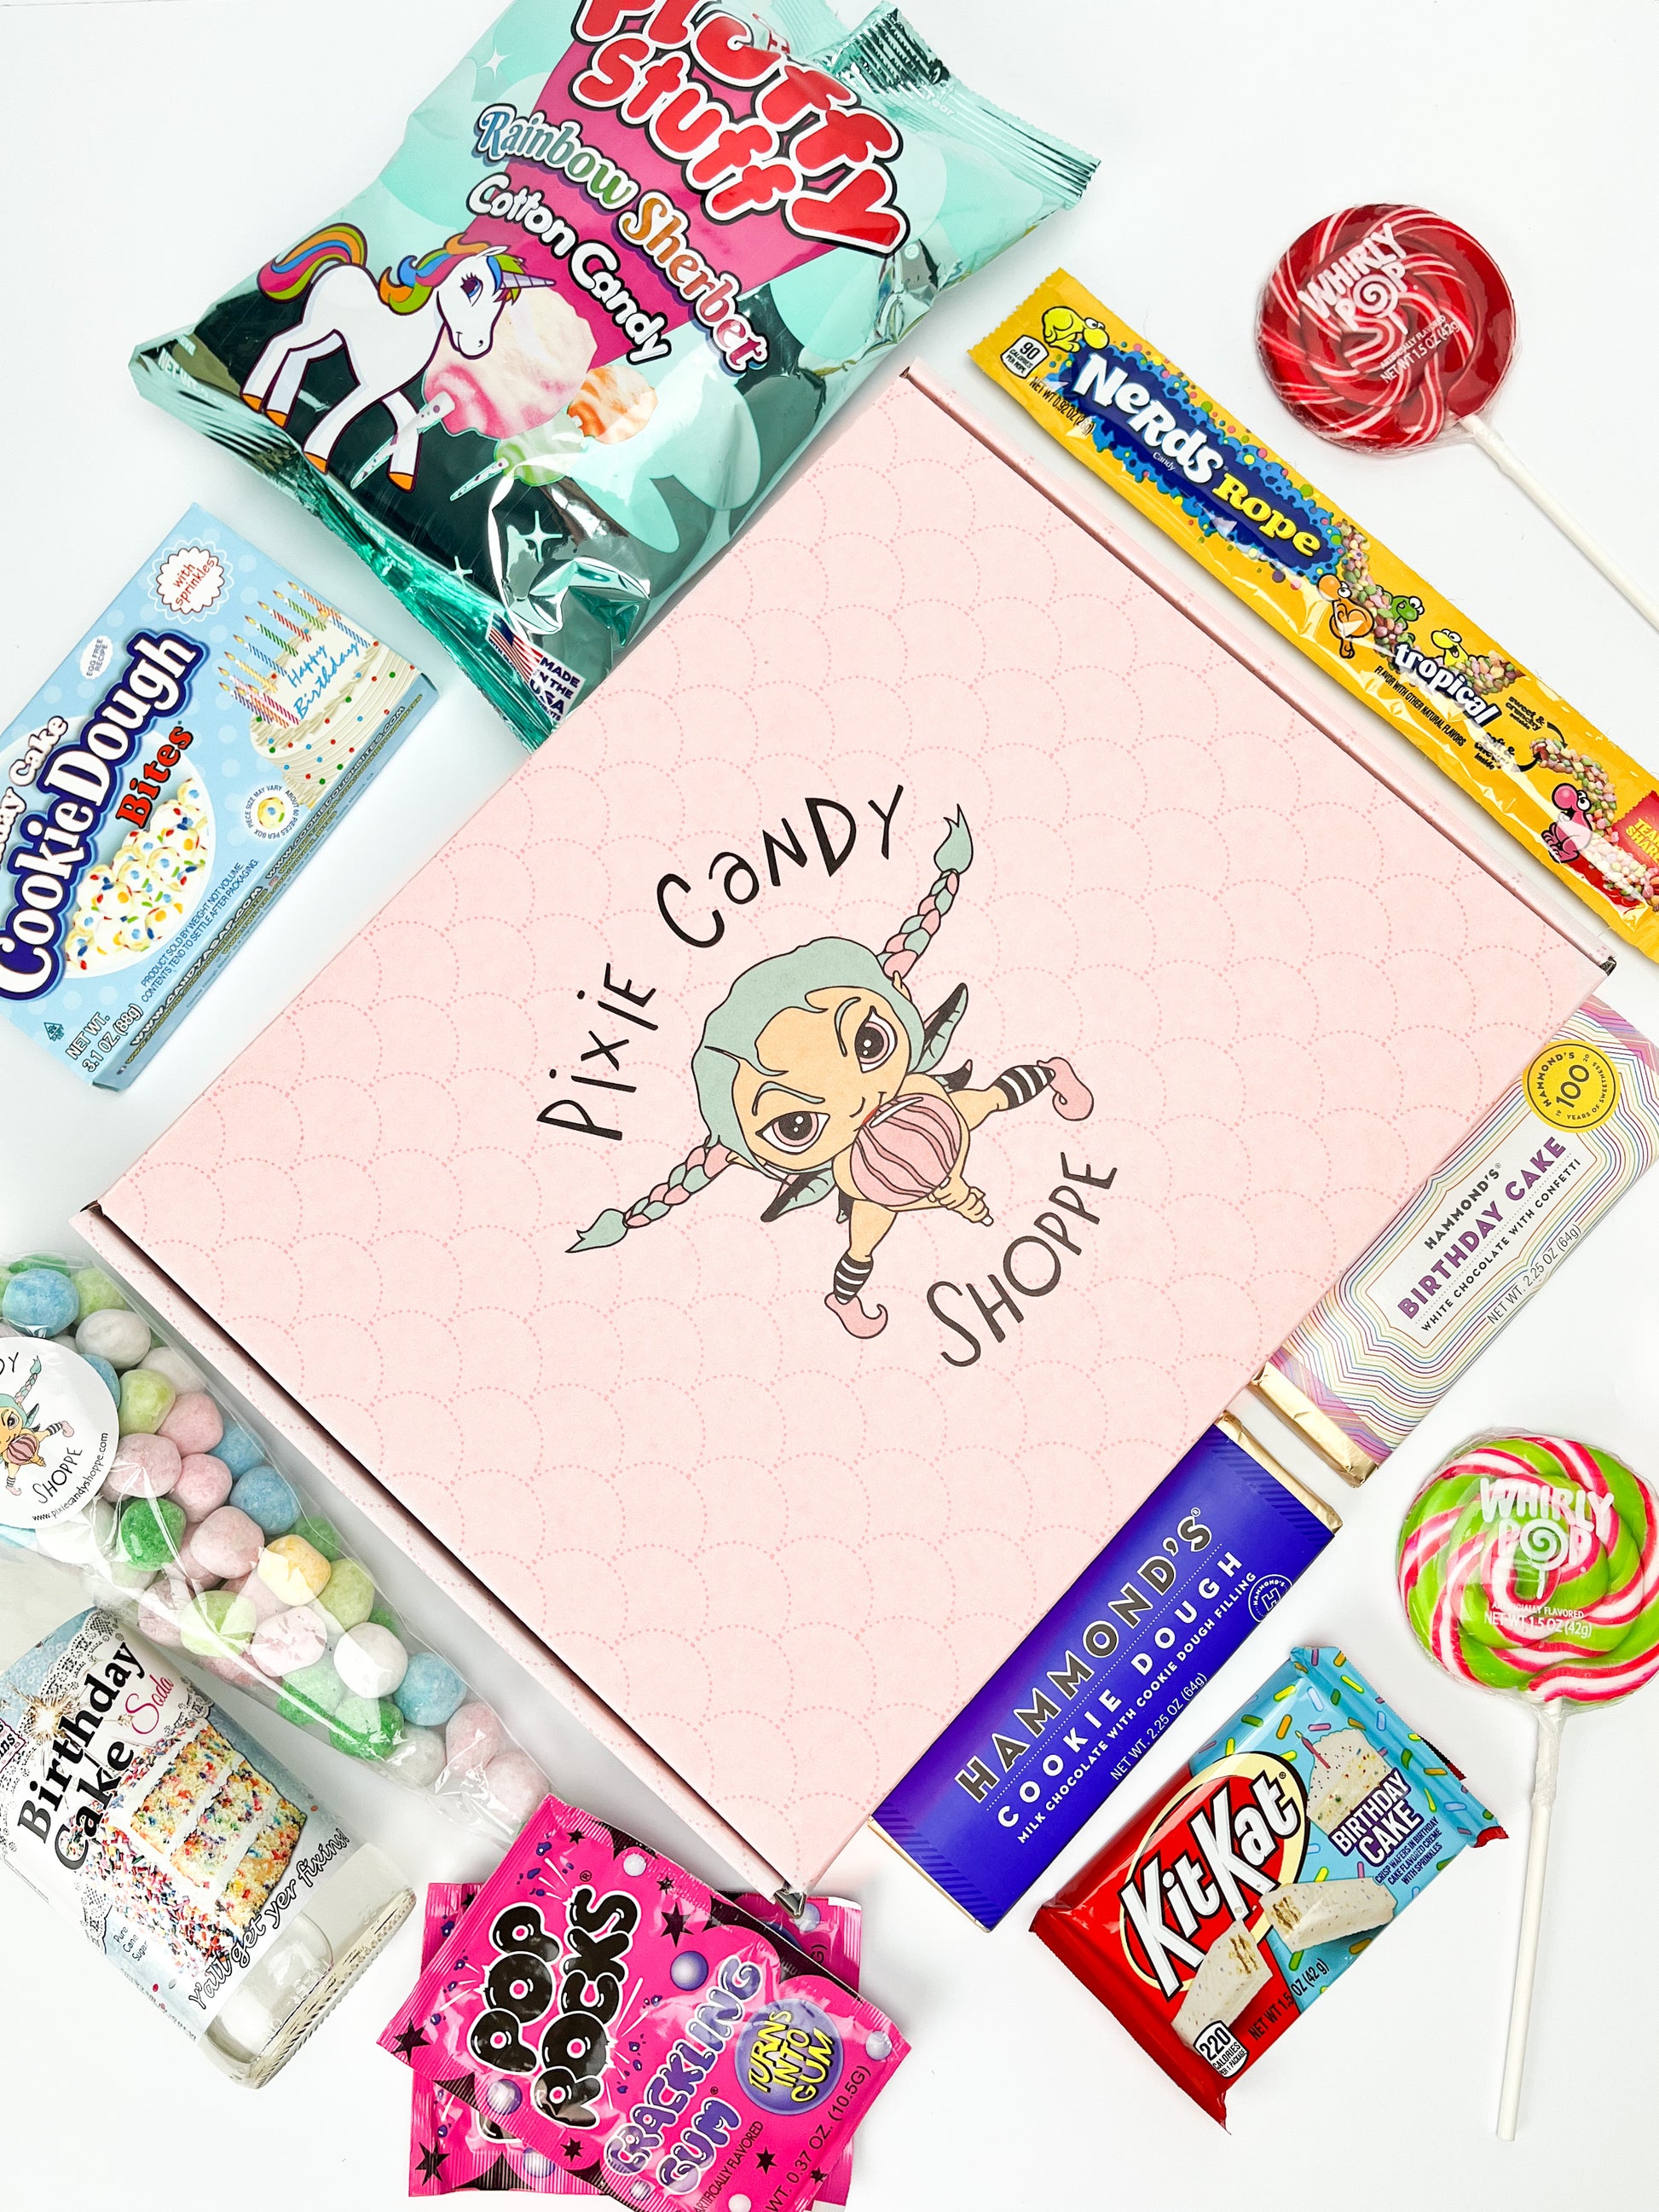 Birthday Candy Mystery Box Magical Mystery Box Pixie Candy Shoppe   